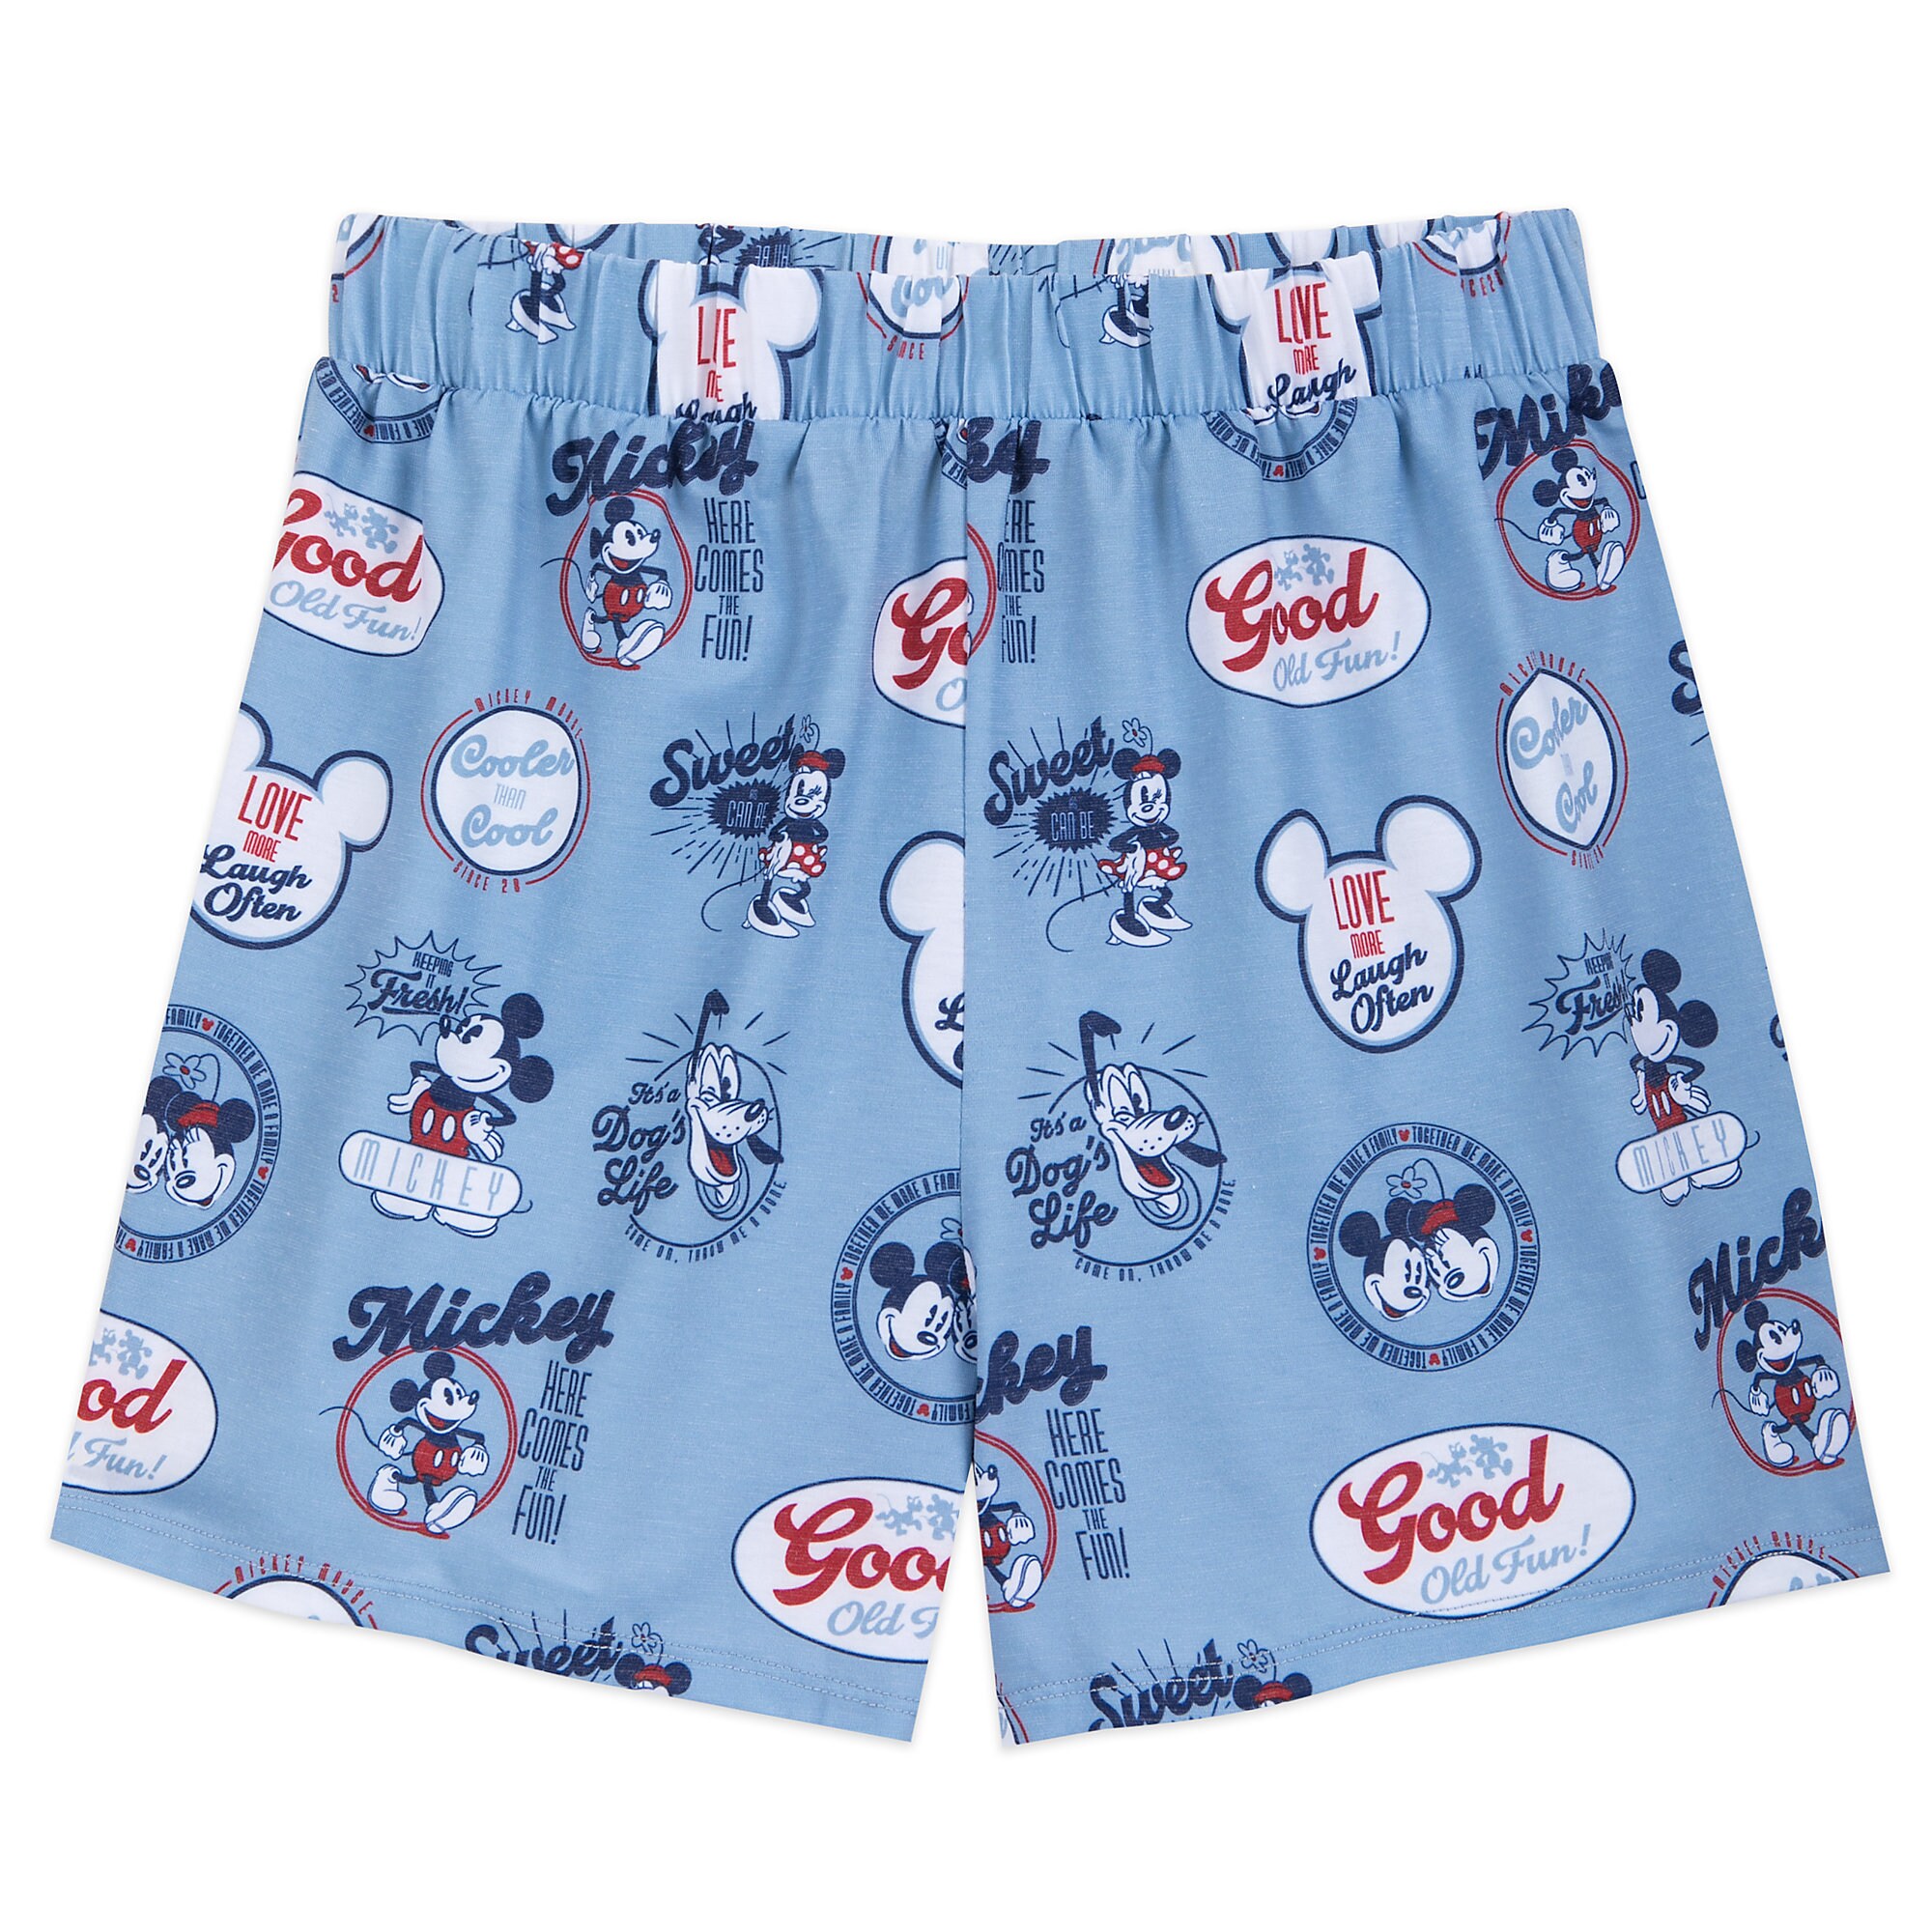 Mickey and Minnie Mouse Pajama Set for Women is now available for ...